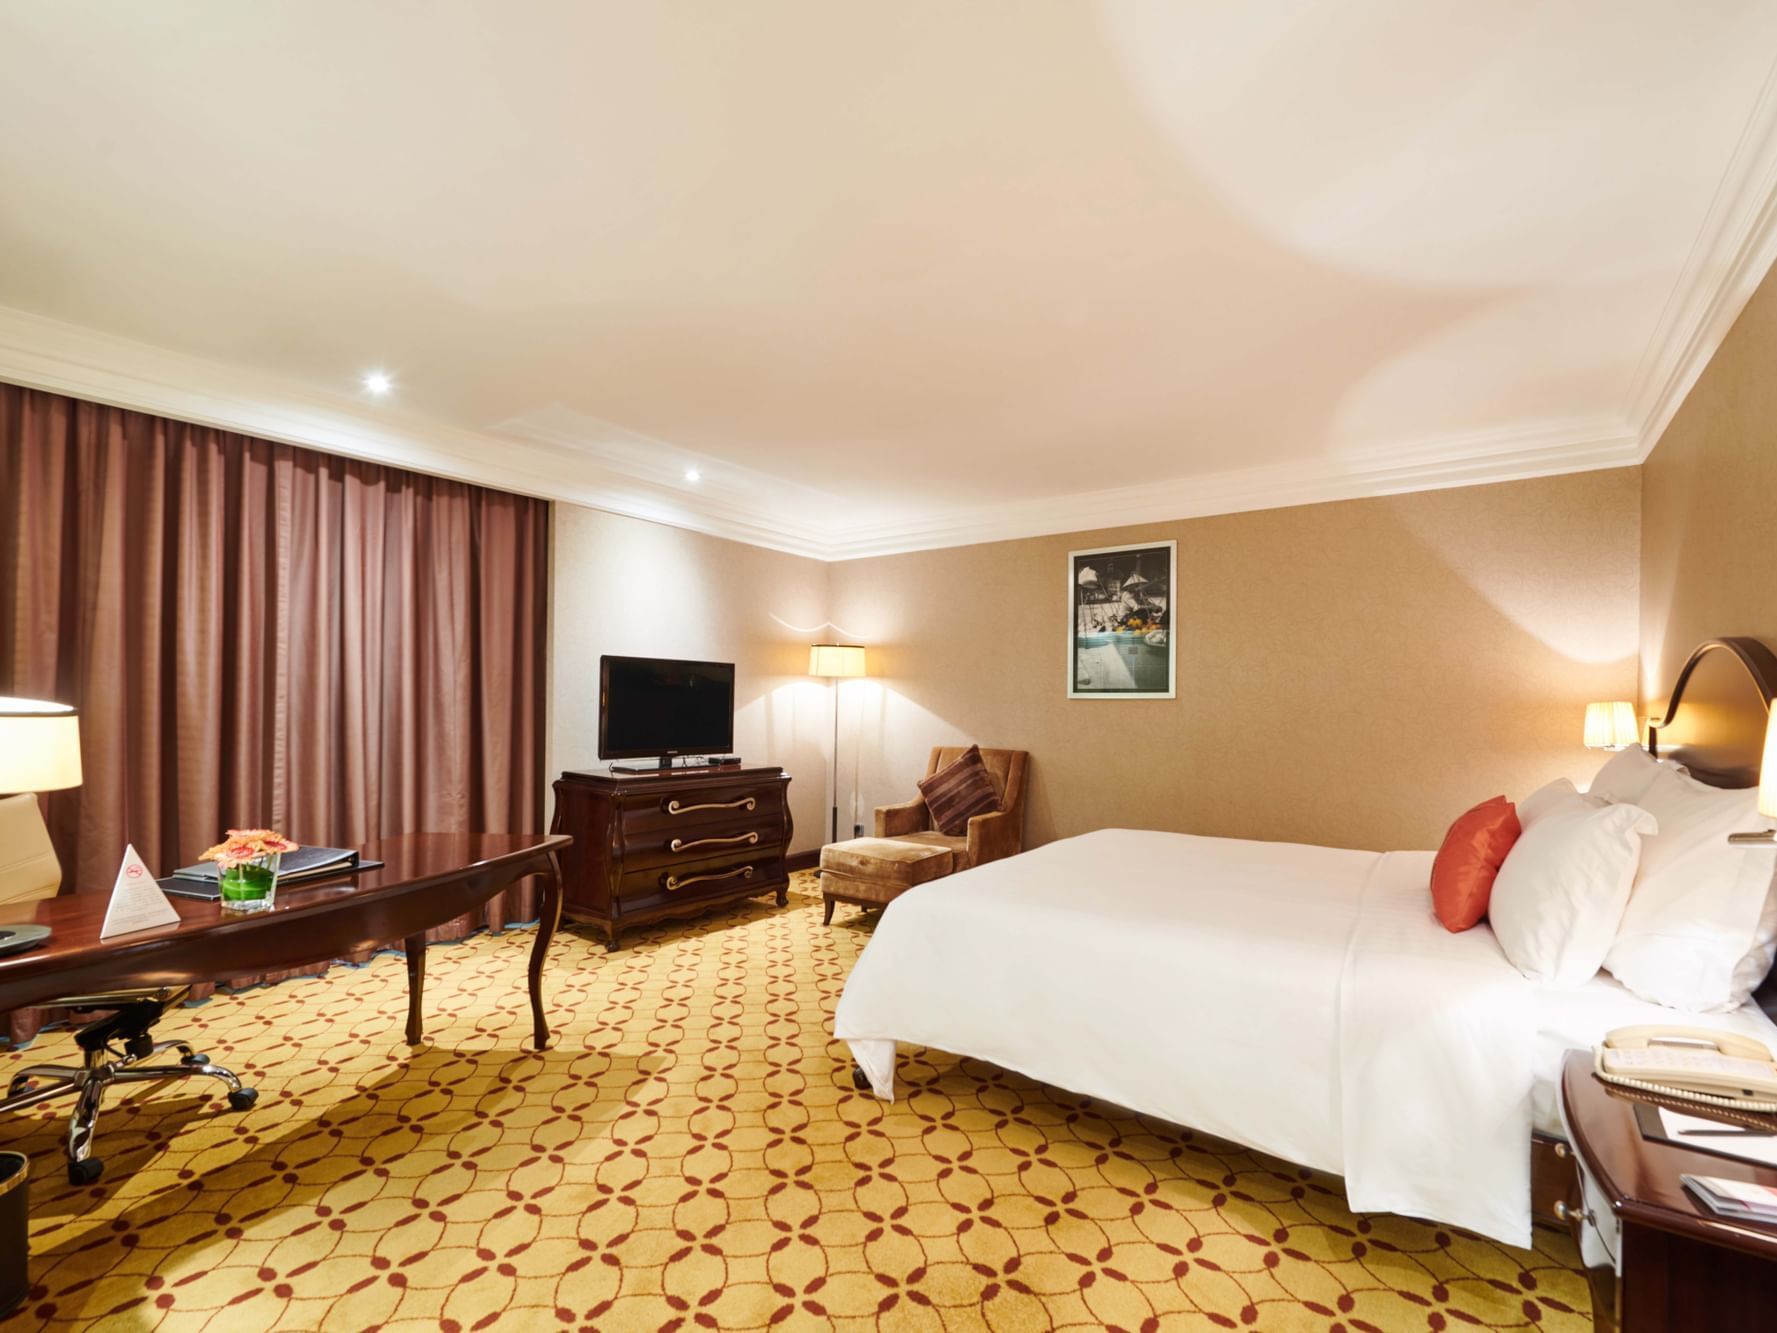 Bed & Tv stand in Premium Deluxe Room at Eastin Hotels